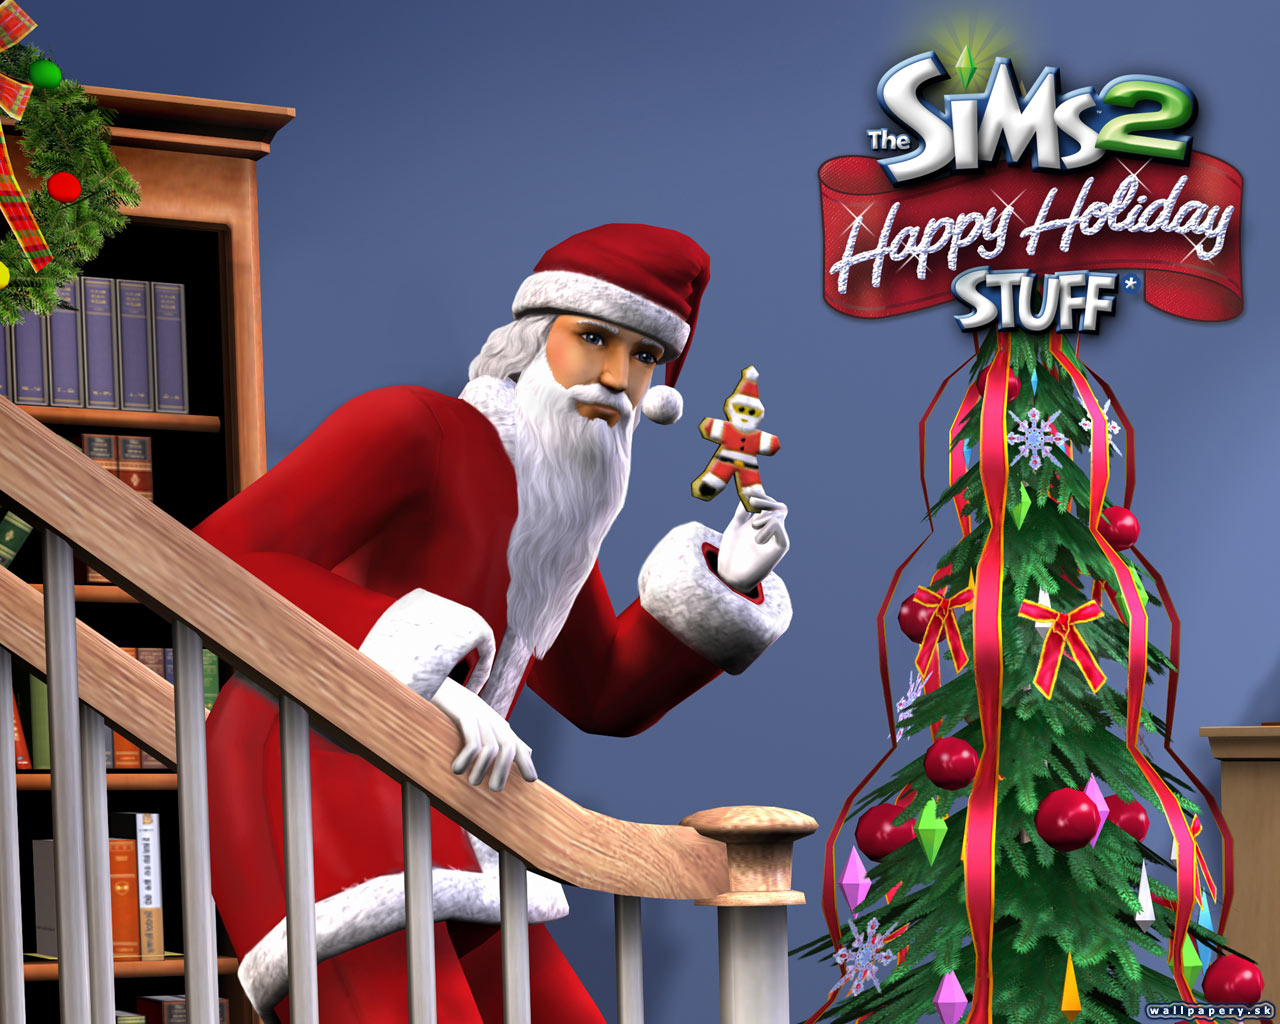 The Sims 2: Happy Holiday Stuff - wallpaper 1